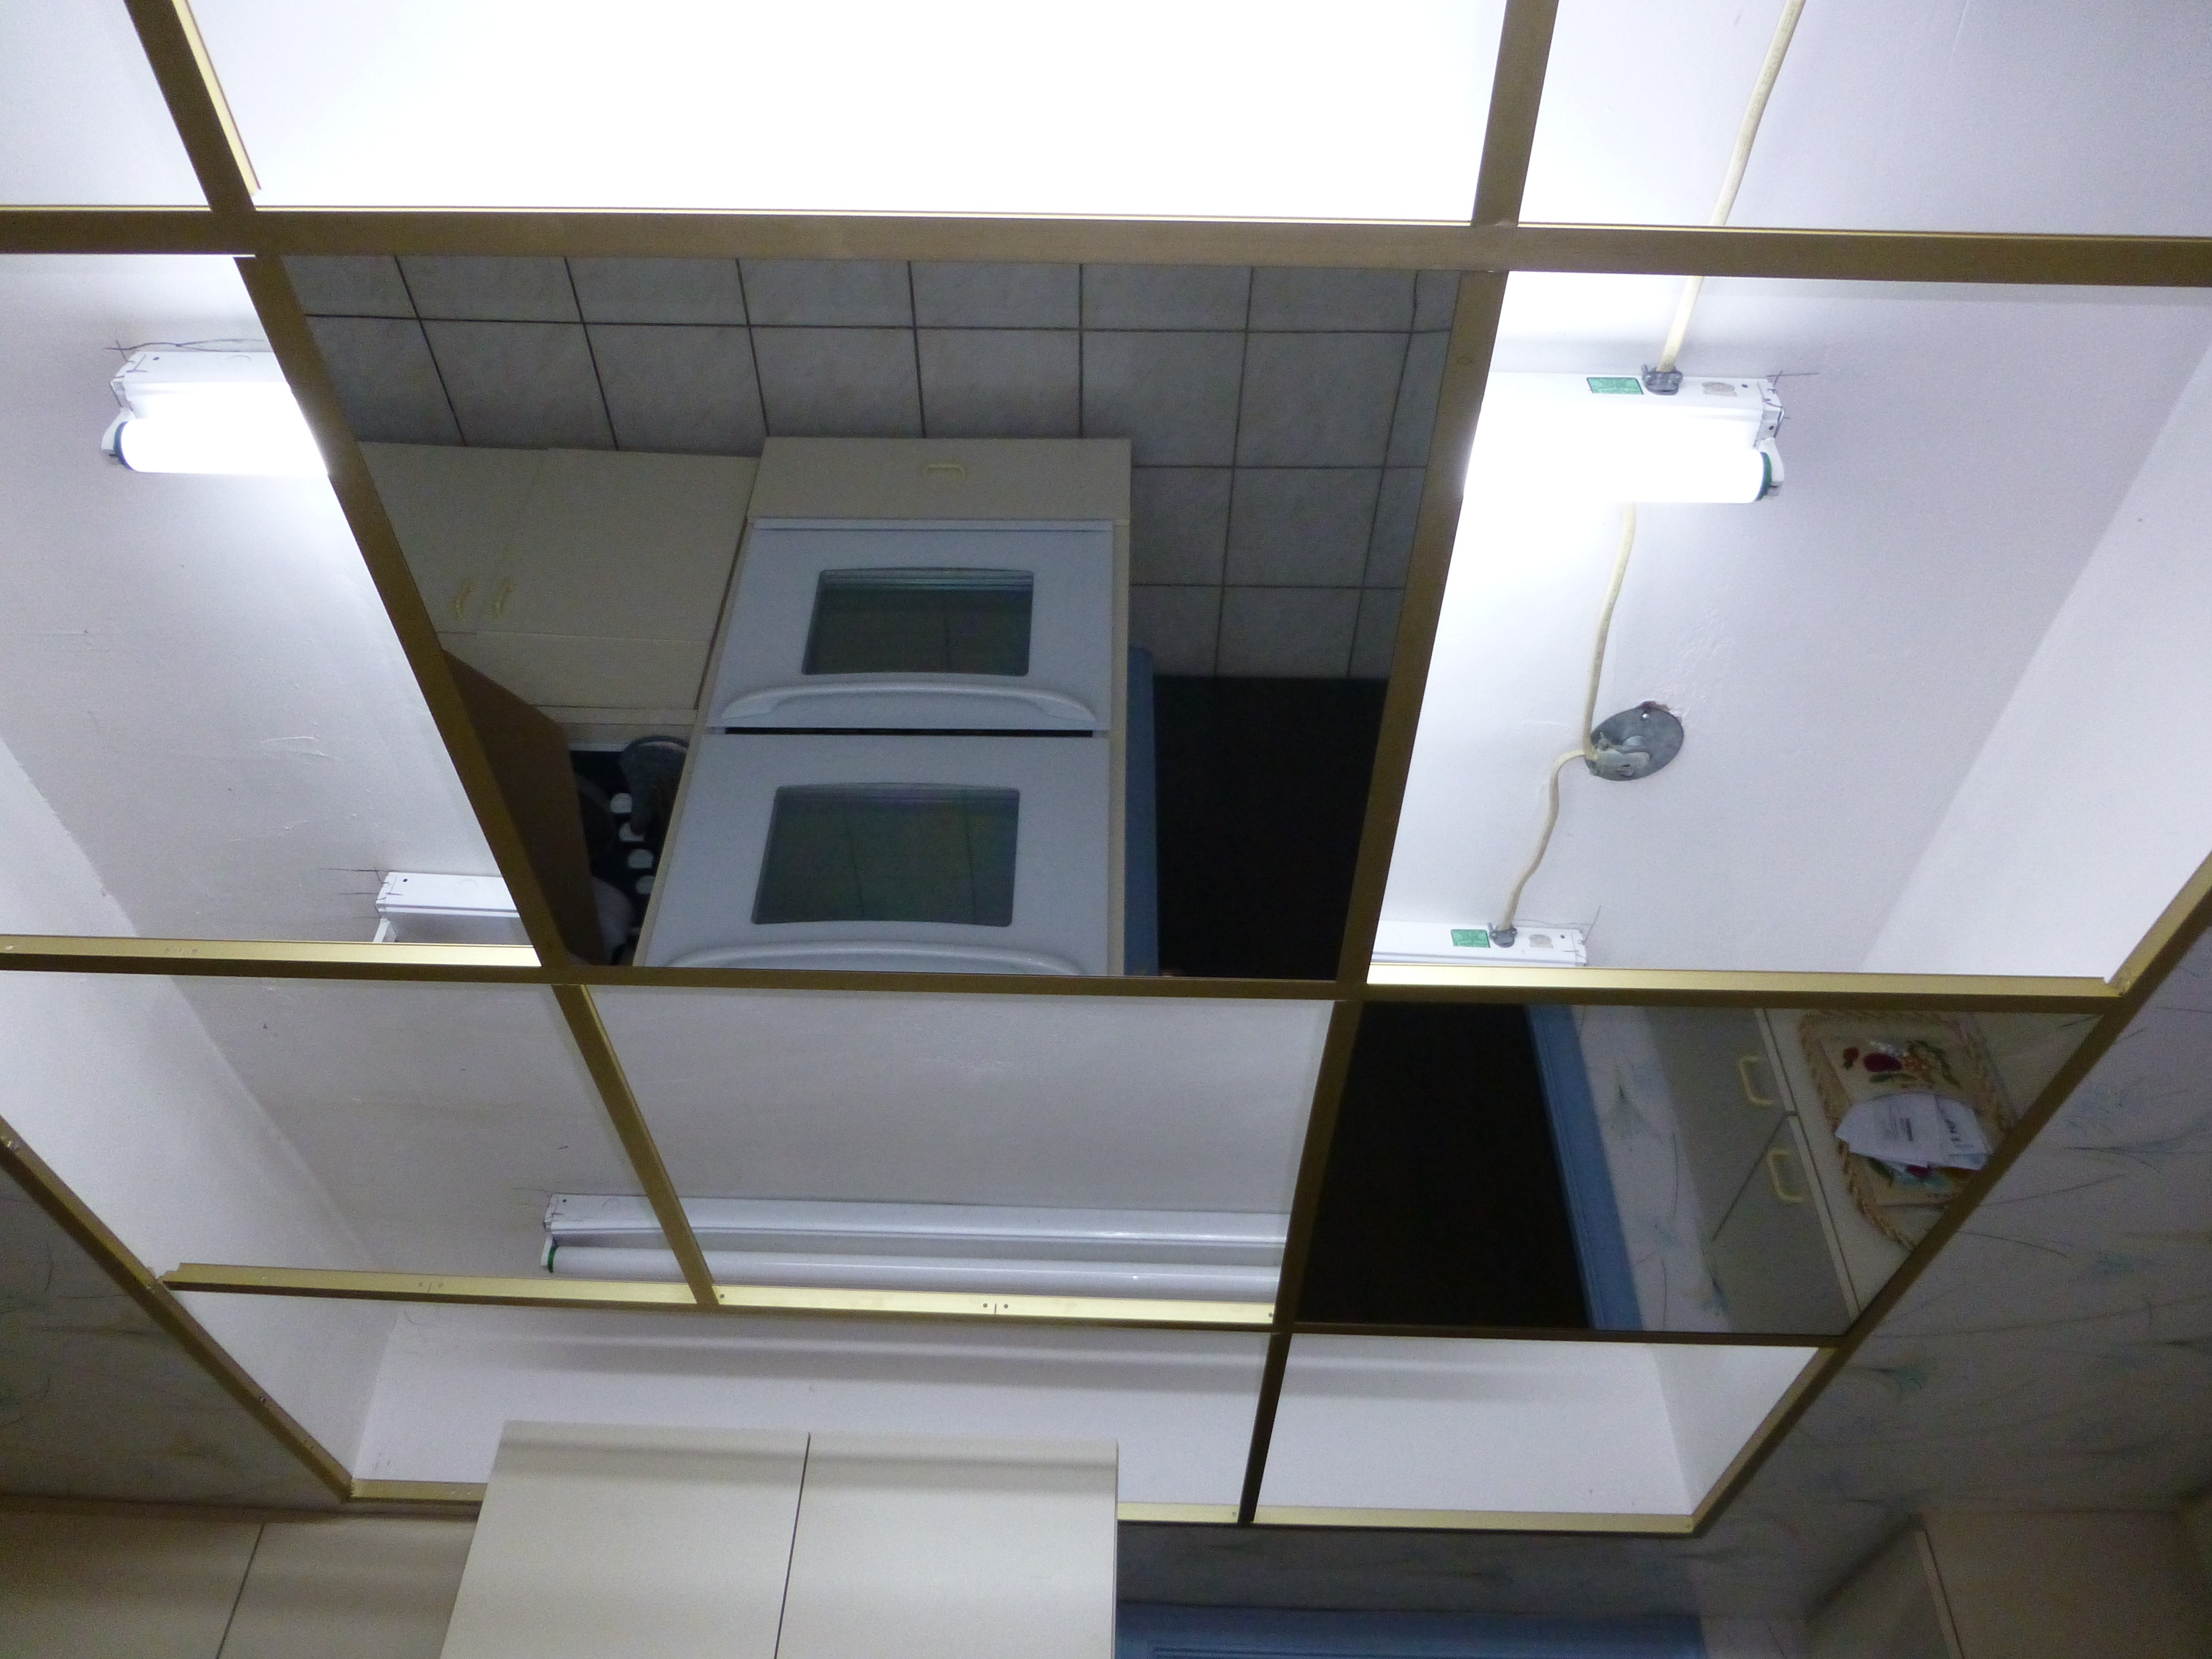 Permalink to Reflective Drop Ceiling Tiles